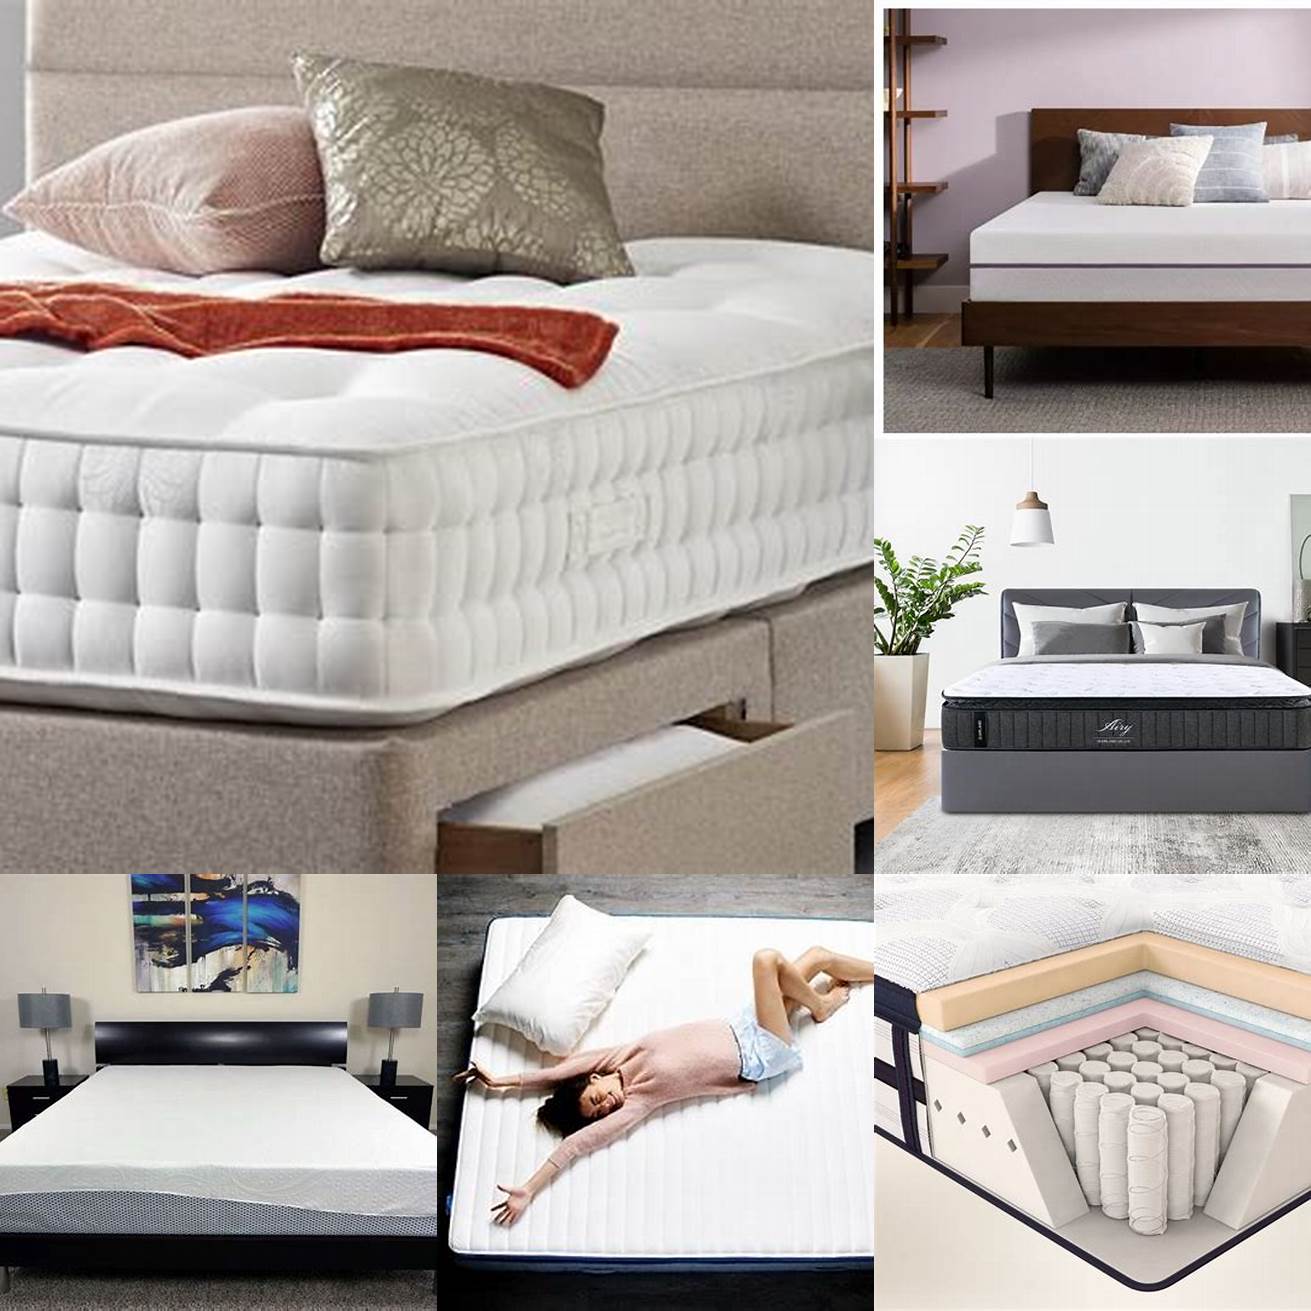 2 Choose a mattress that suits your sleeping preferences and budget